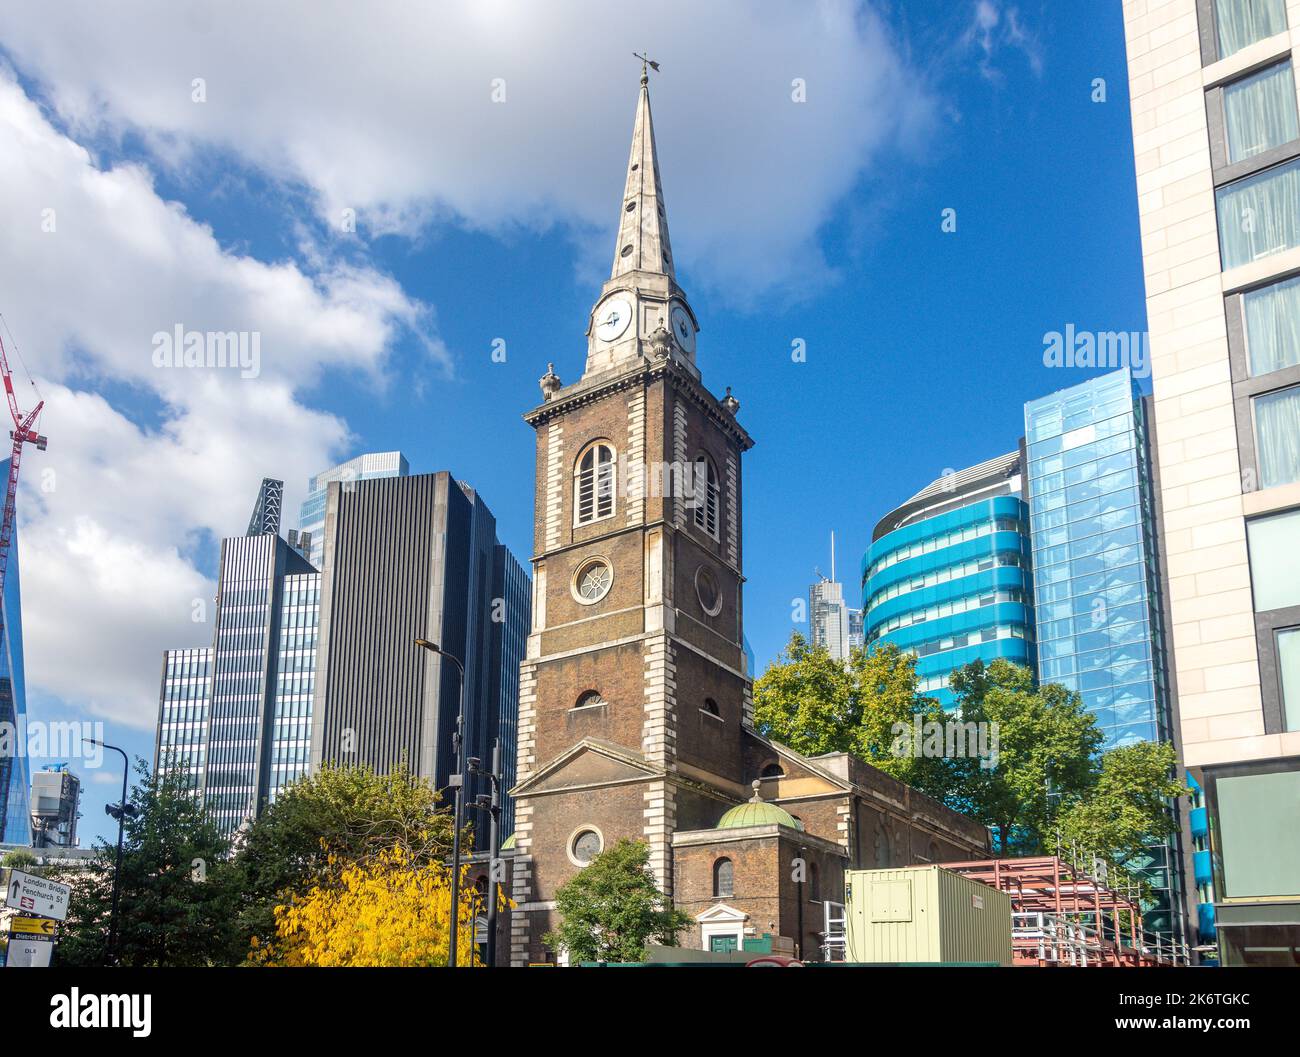 St Botolph Without Aldgate Church, Aldgate High Street, Aldgate, The London Borough of Tower Hamlets, Greater London, England, United Kingdom Stock Photo